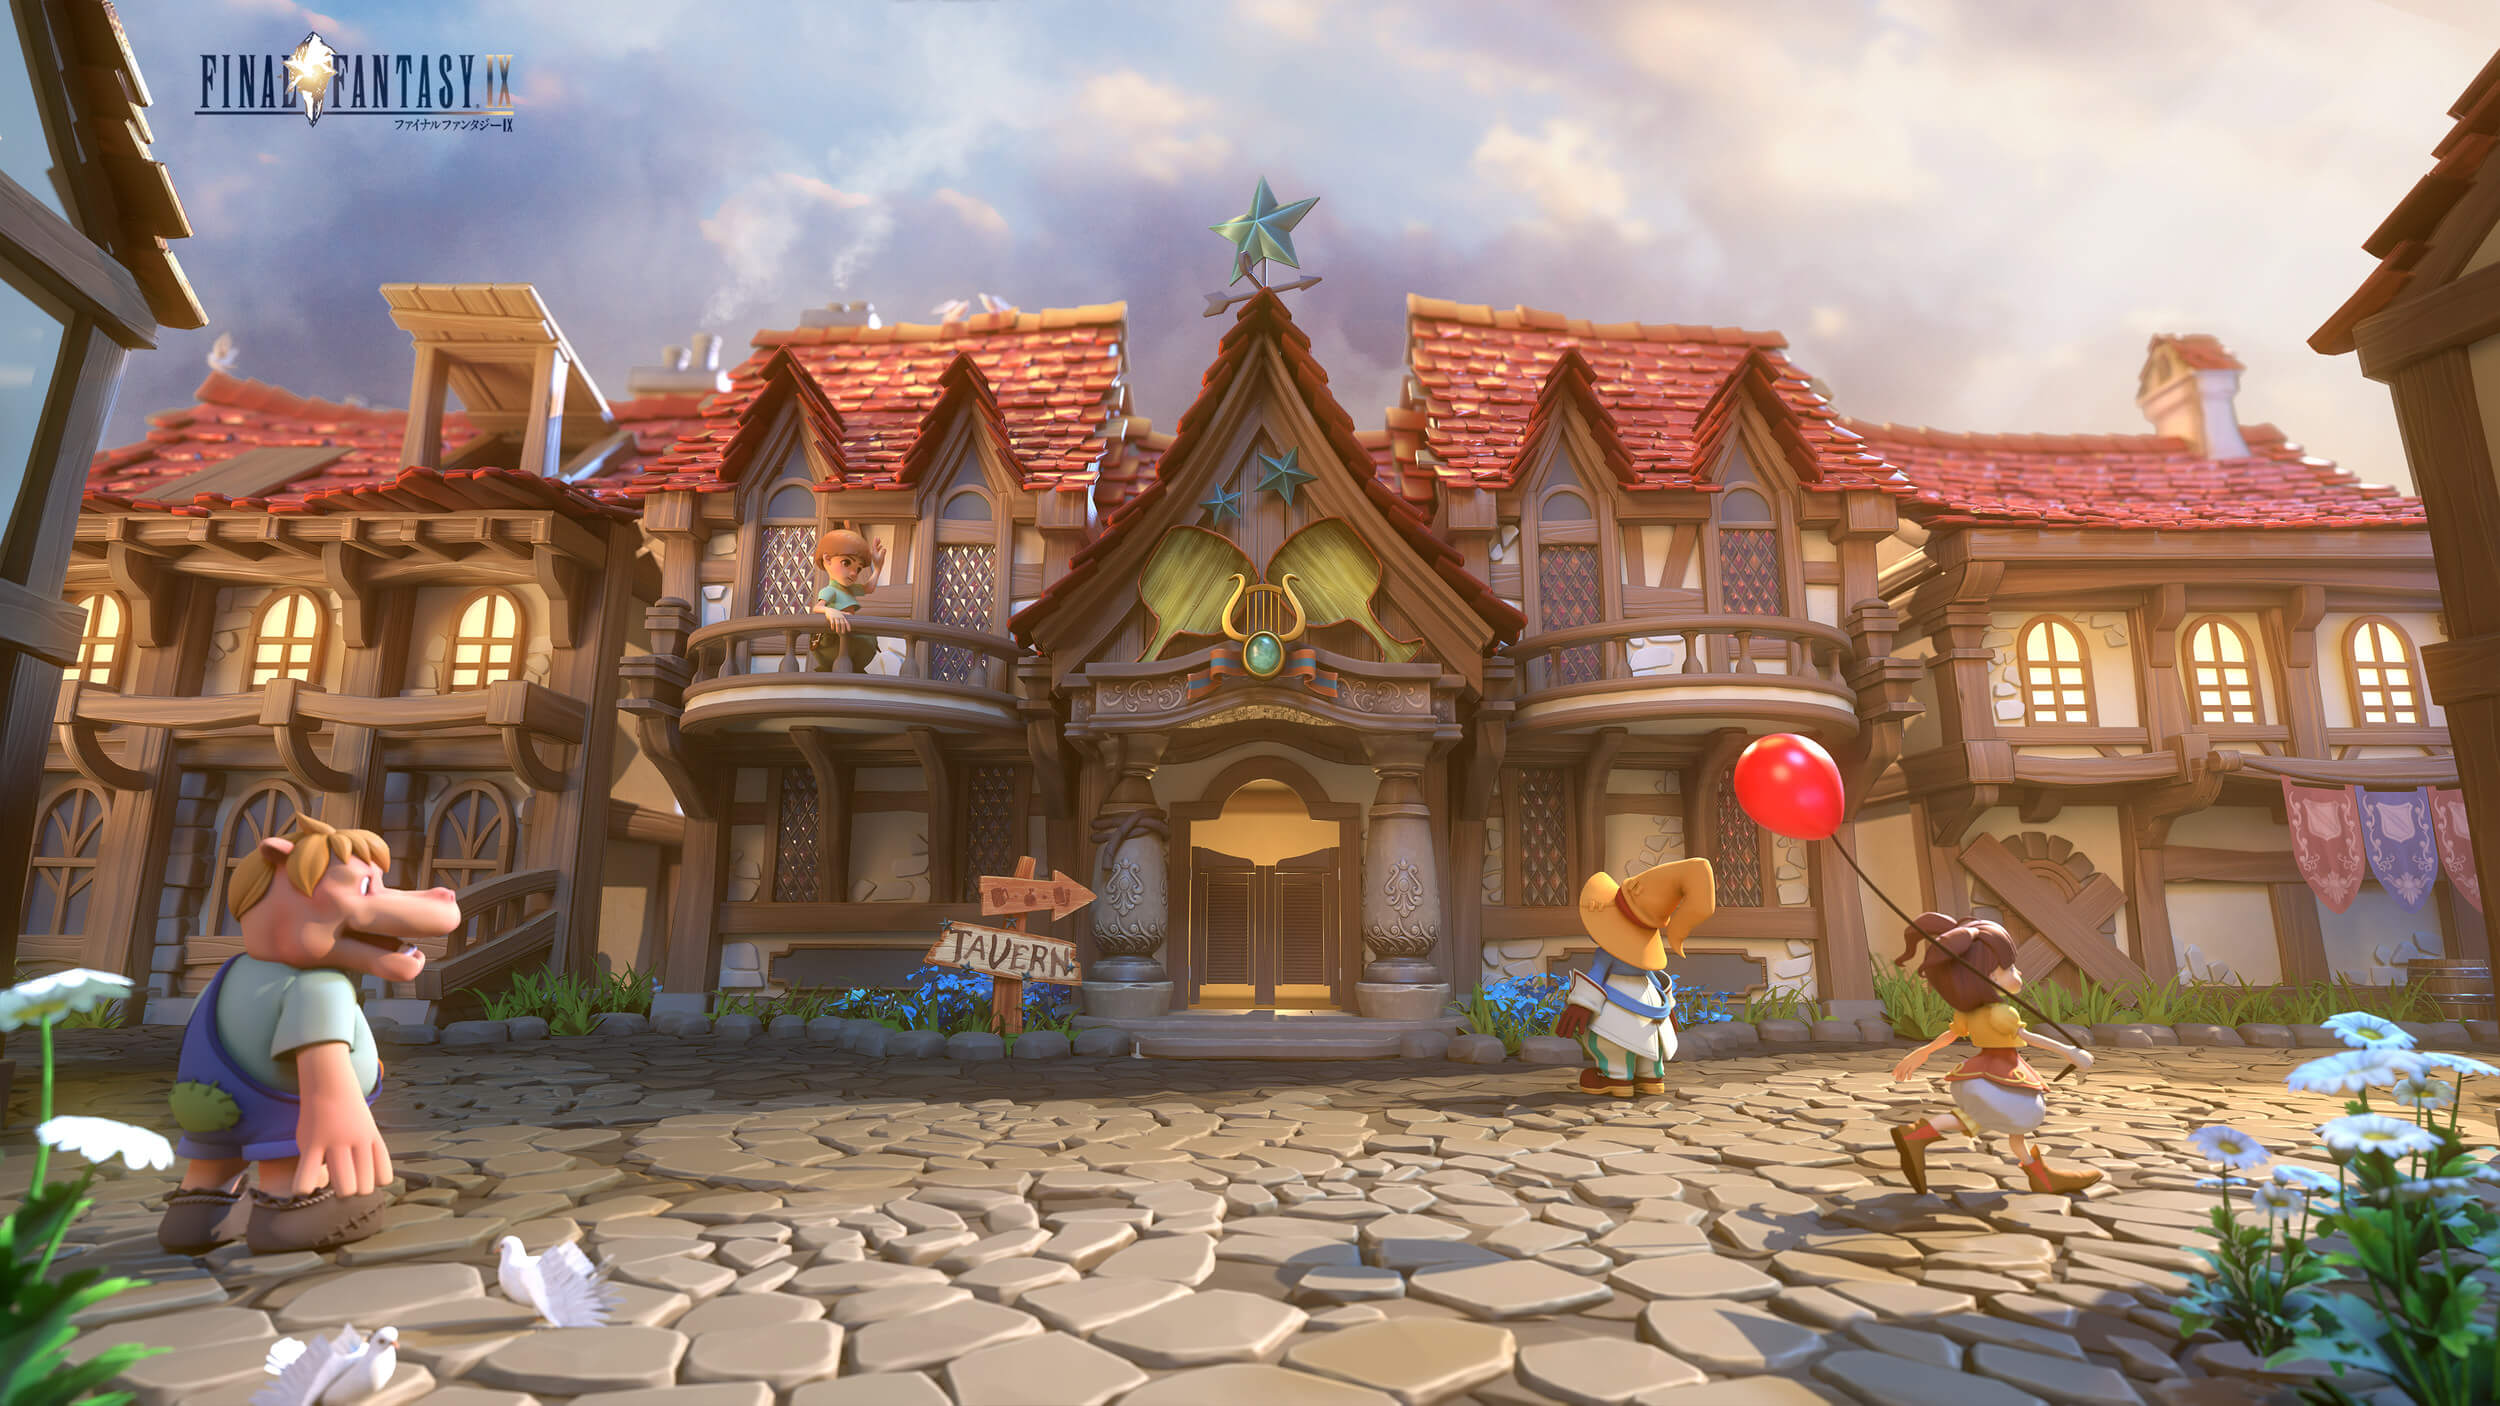 Final Fantasy IX looks incredible in this Unreal Engine 5 Fan Remake